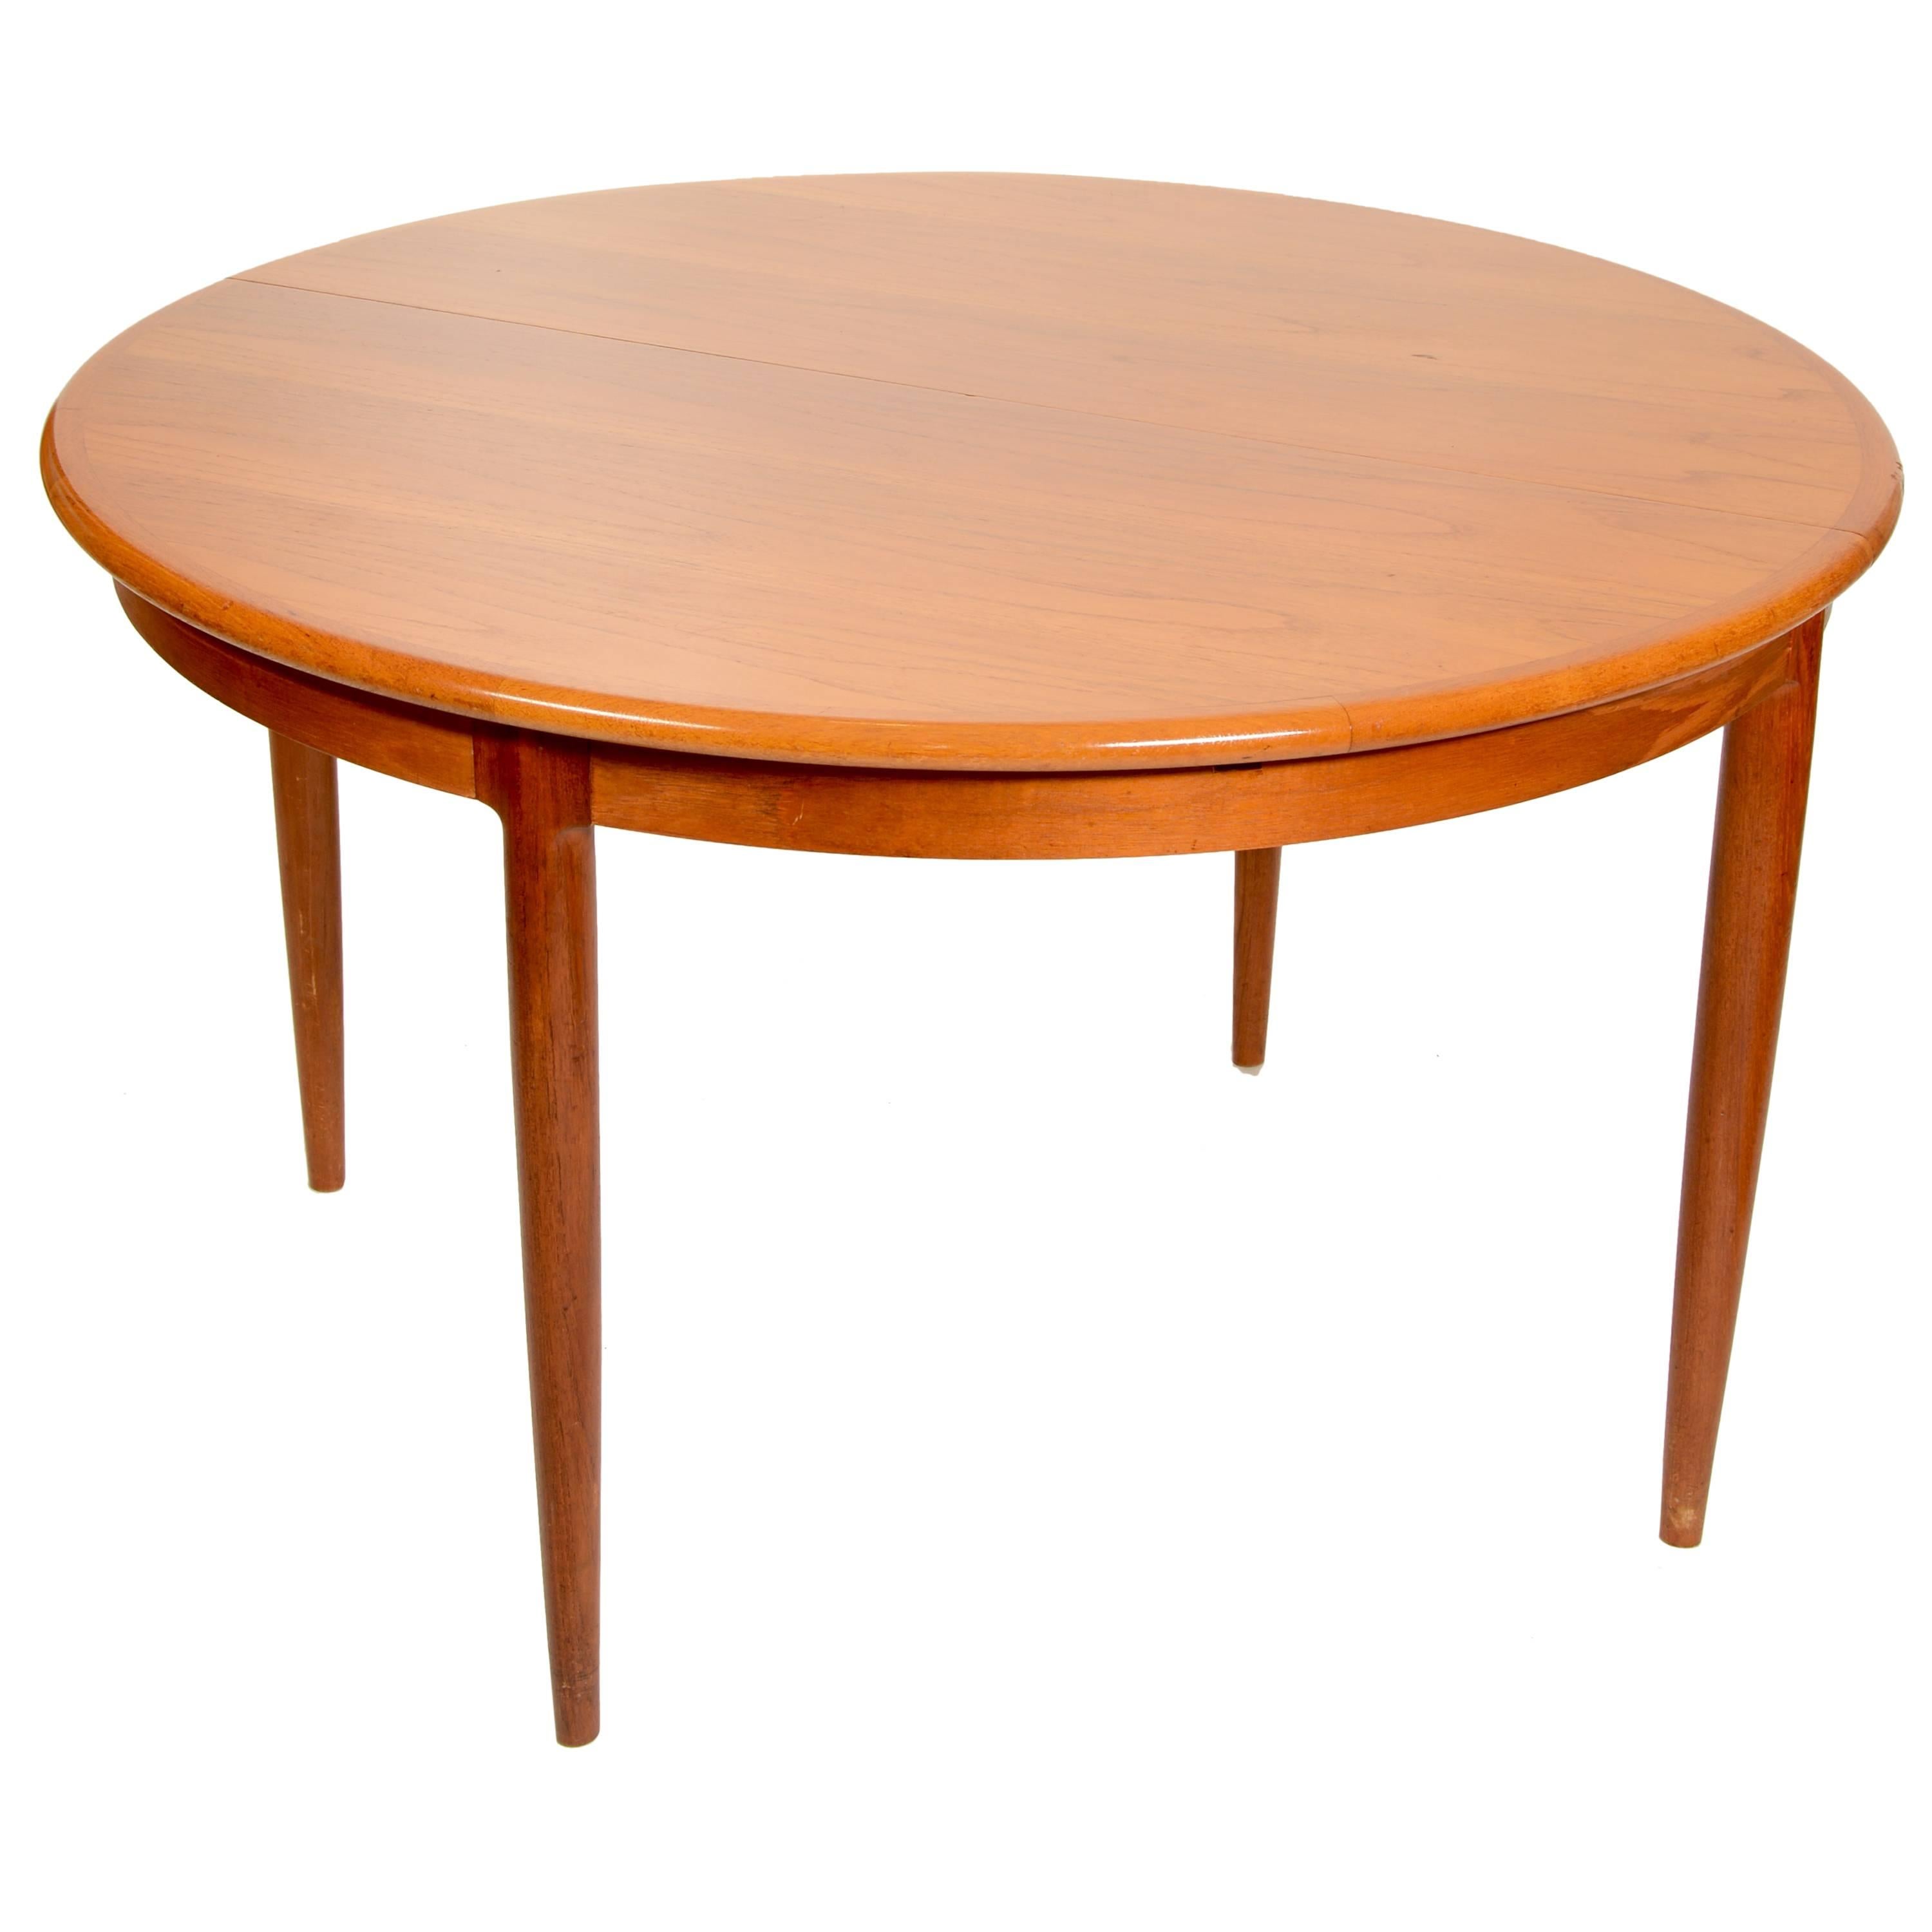 Niels Otto Moller for J. L. Moller #15 Teak Table with Butterfly Leaf